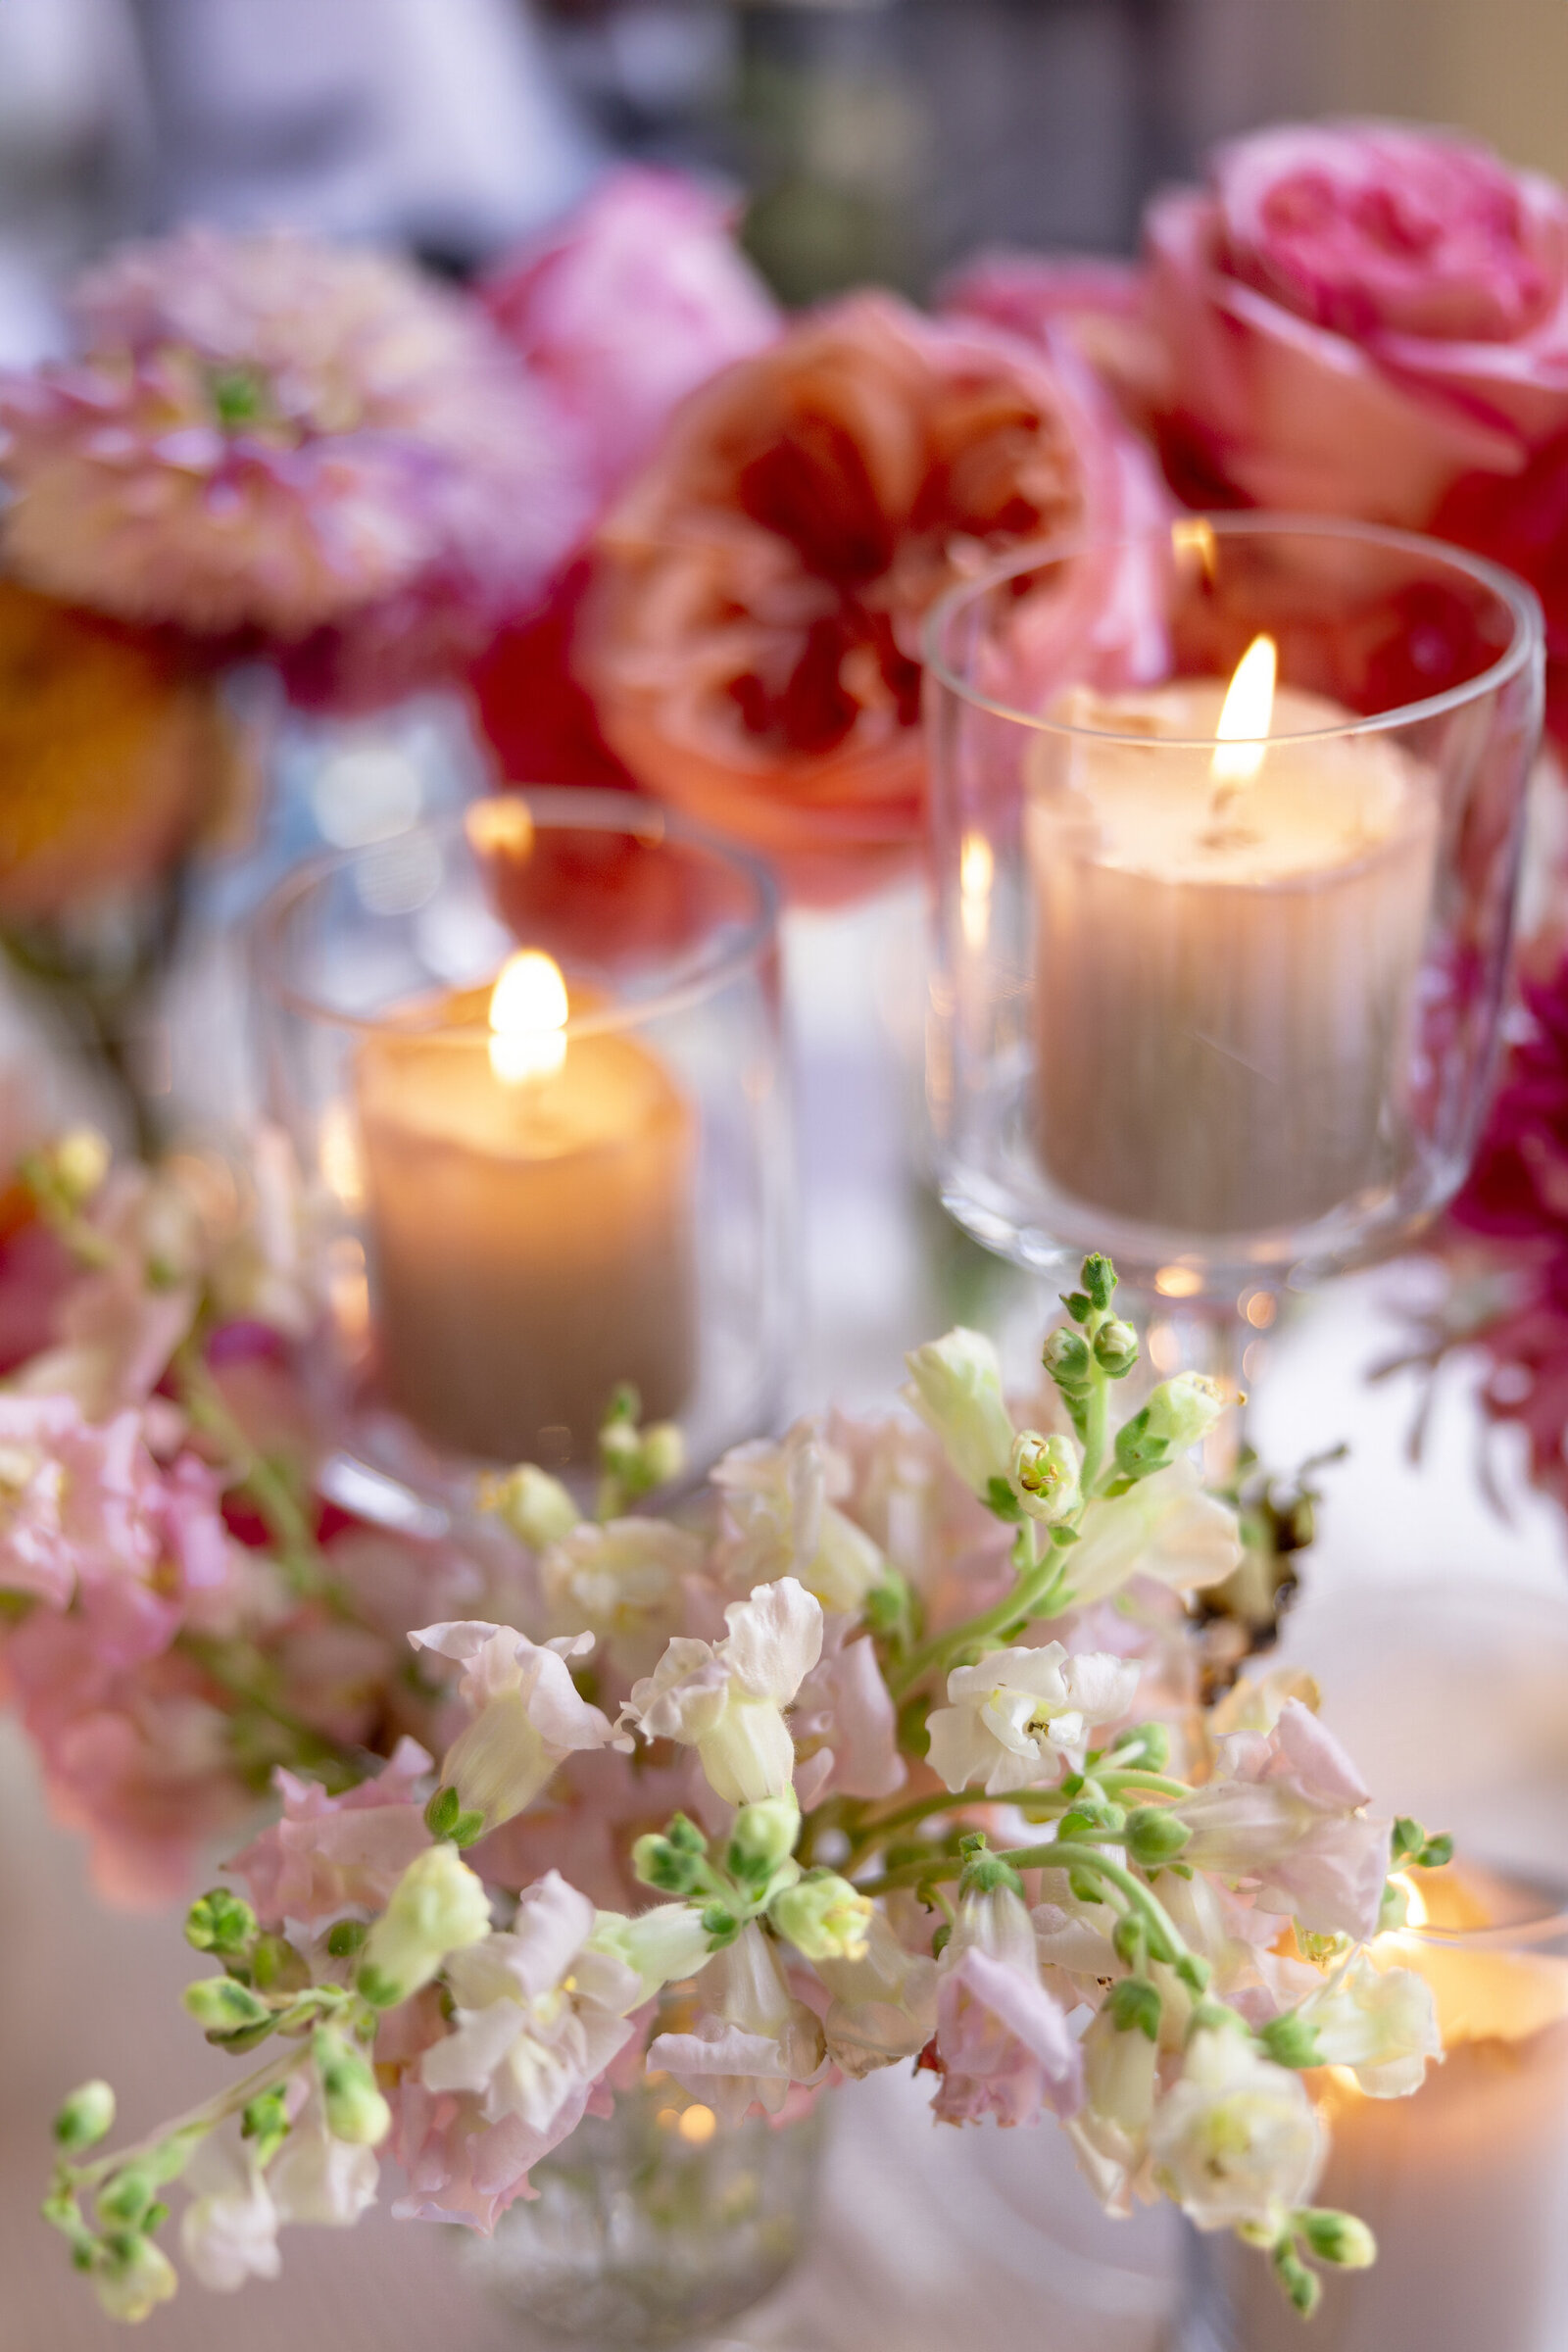 125_Kate Campbell Floral Colorful Indian Wedding at Gramercy Mansion Reception by Anna Schmidt photo